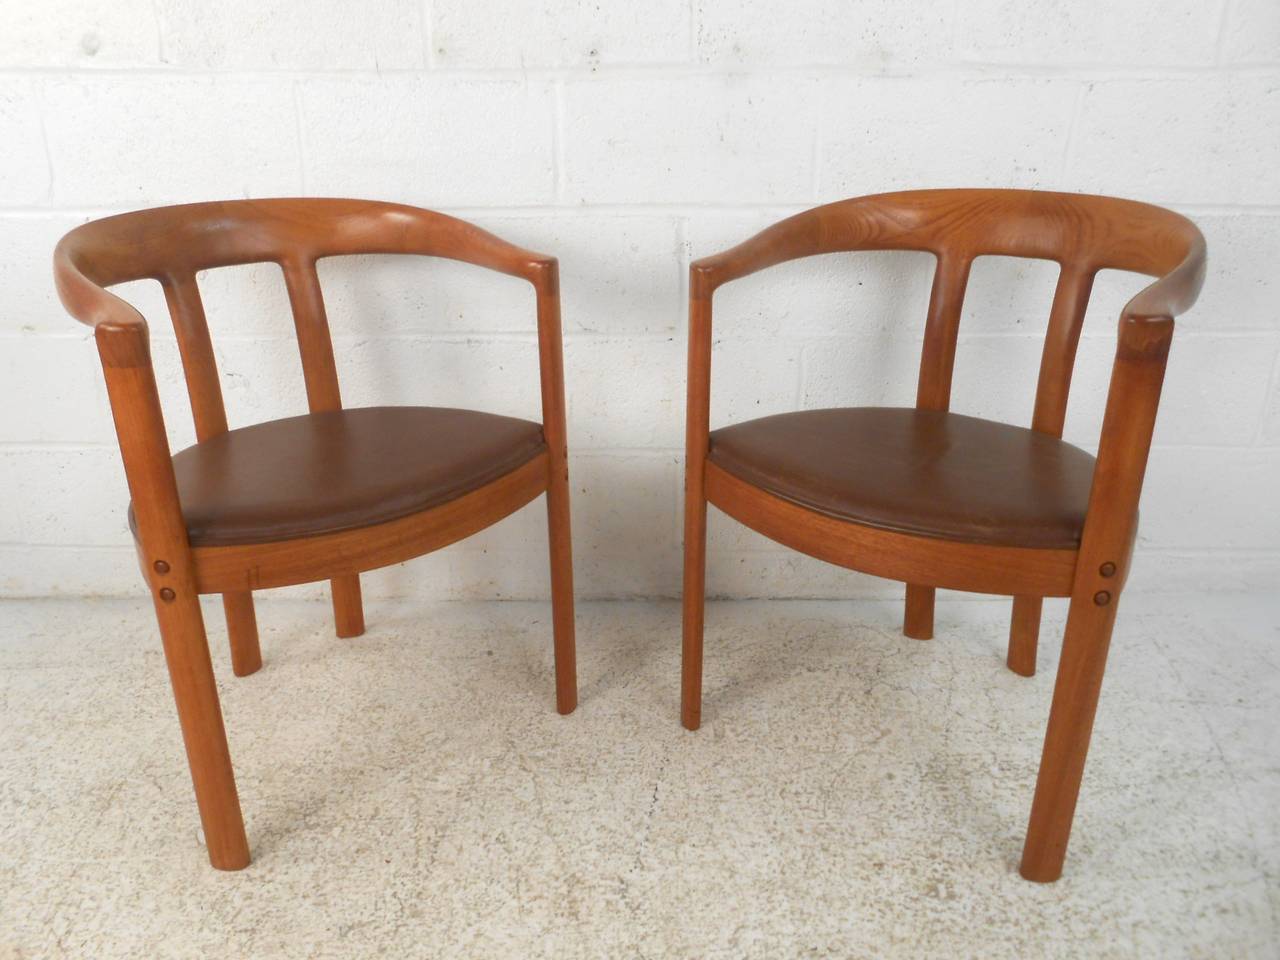 Pair of impressive Danish armchairs with rounded backs, made by L. Olsen & Son with great craftsmanship. Great detail to the sculpted backs, tight dovetailing with rich teak grain throughout and leather seats. Similar to the famous round chair by